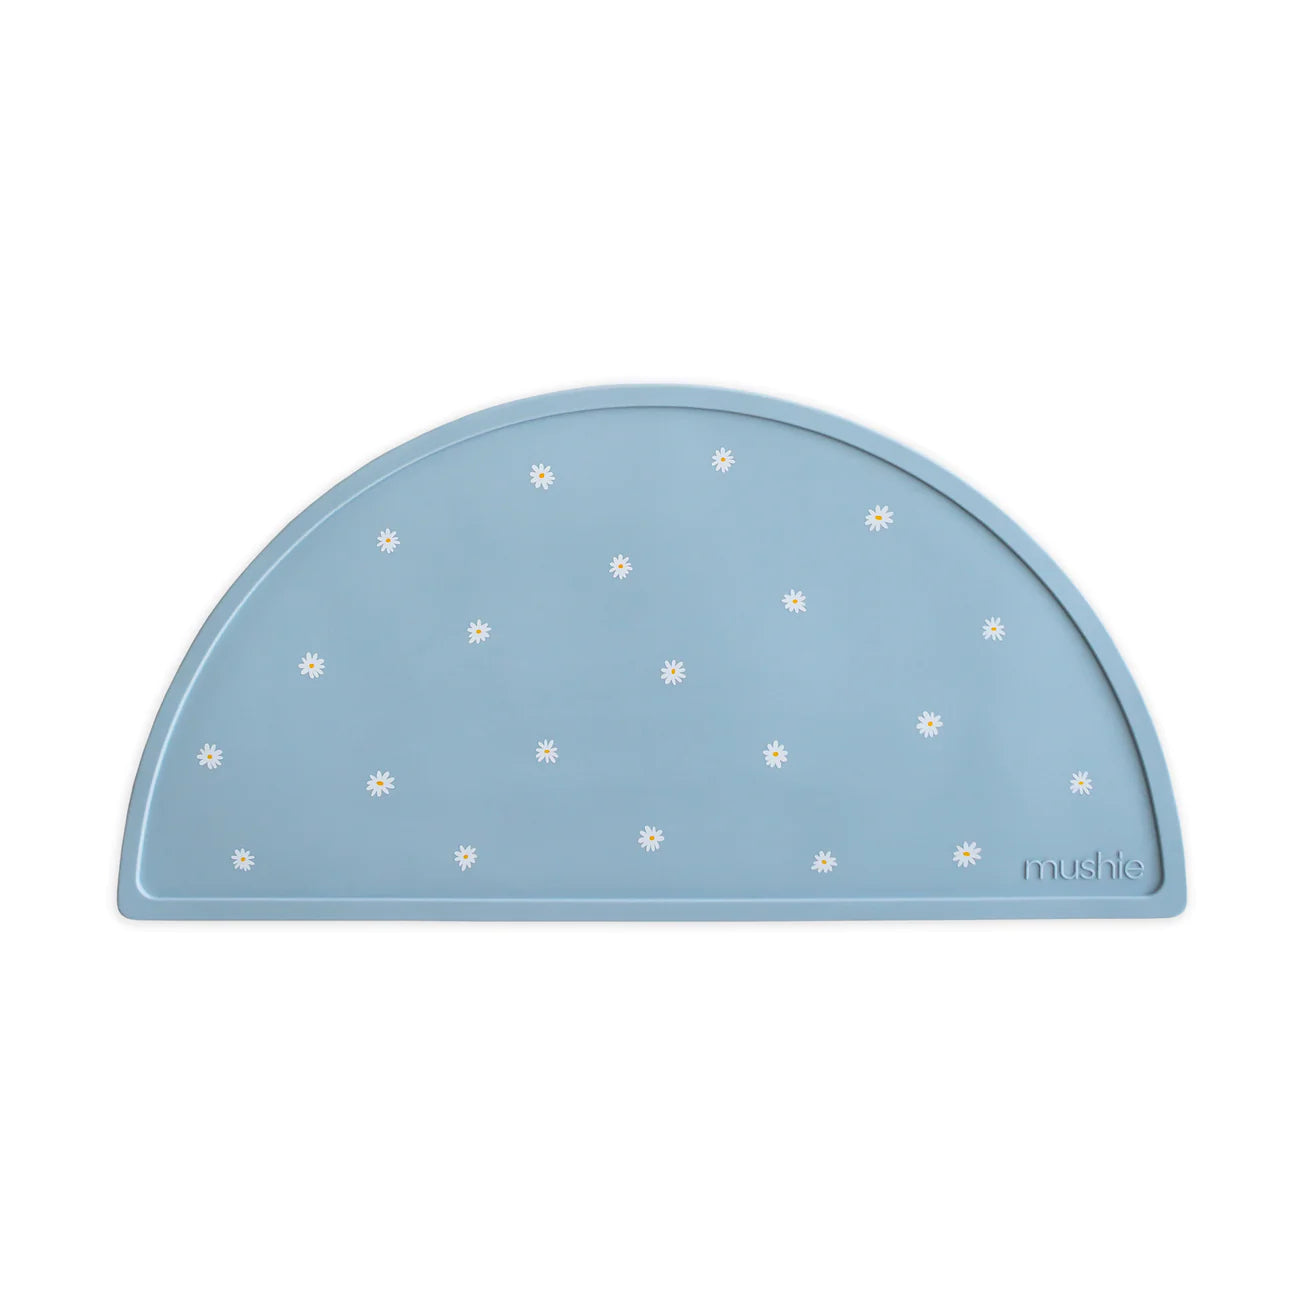 💗 NEW MUSHIE 💗 - Silicone Place Mat